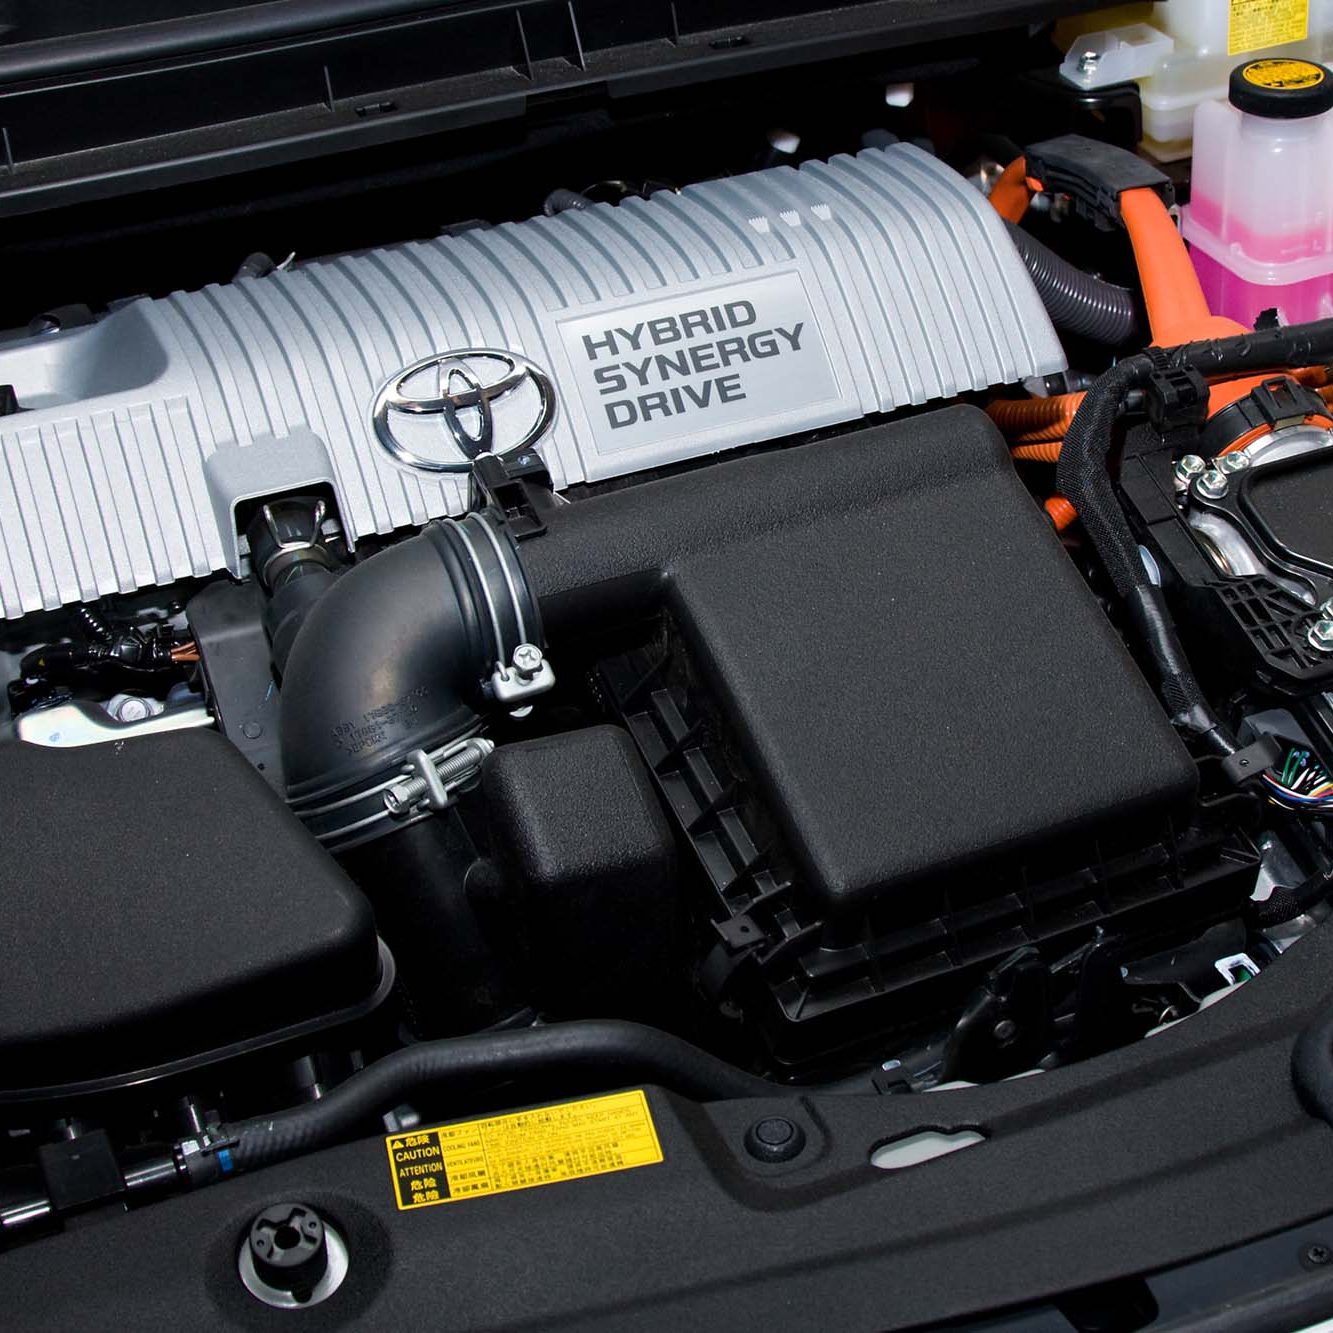 Engine of Toyota Prius Hybrid vehicle 2009 model with Synergy Drive